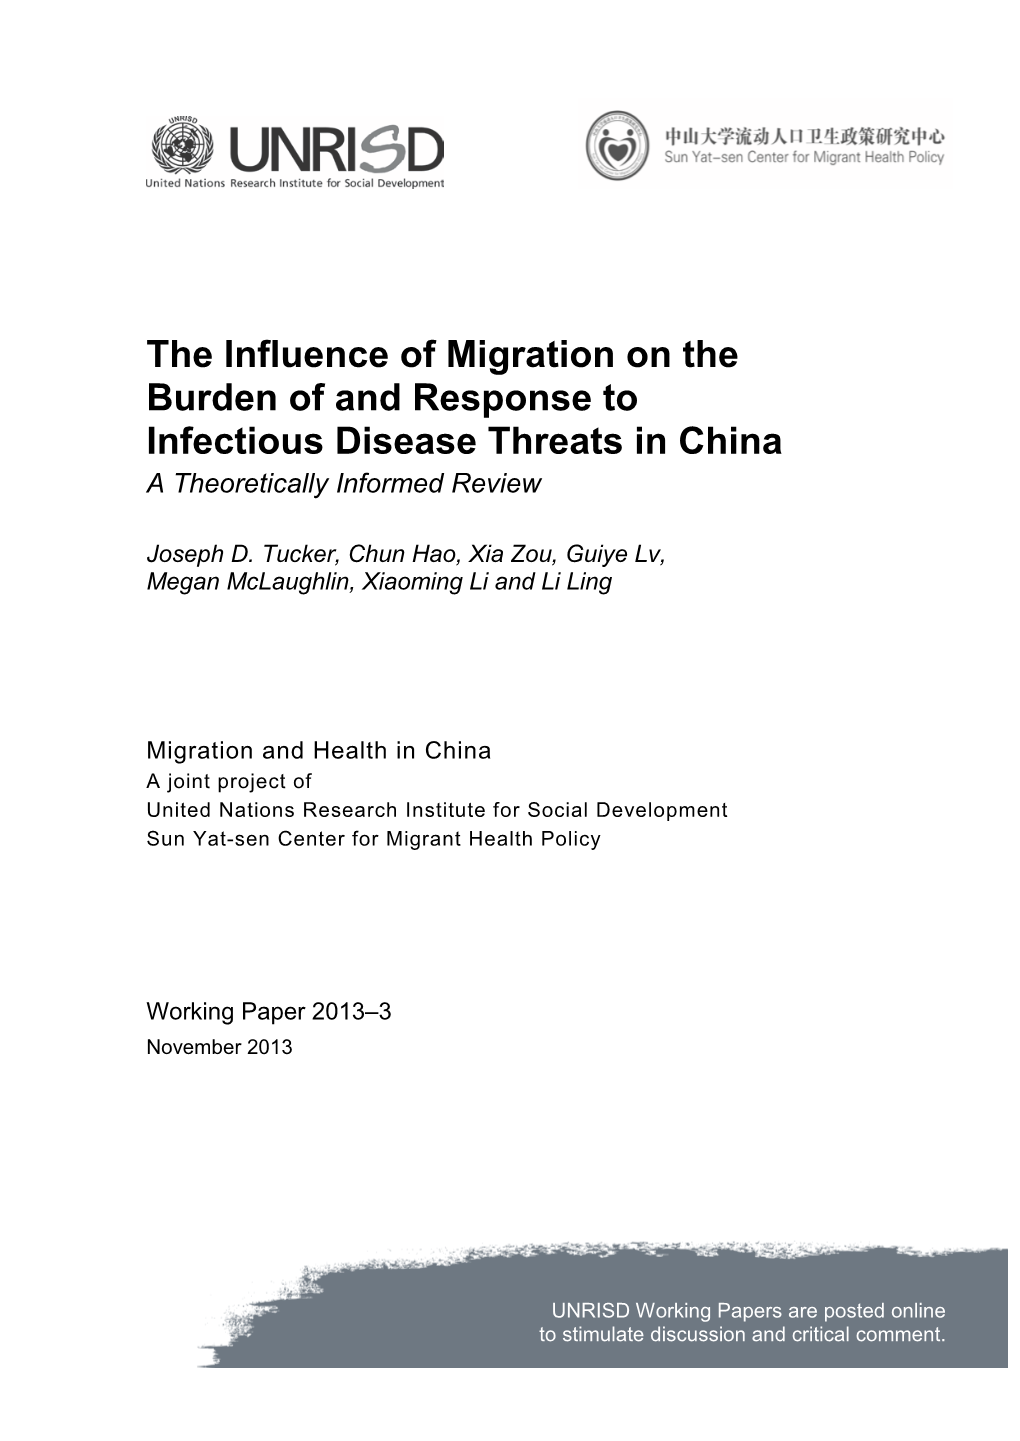 The Influence of Migration on the Burden of and Response to Infectious Disease Threats in China a Theoretically Informed Review